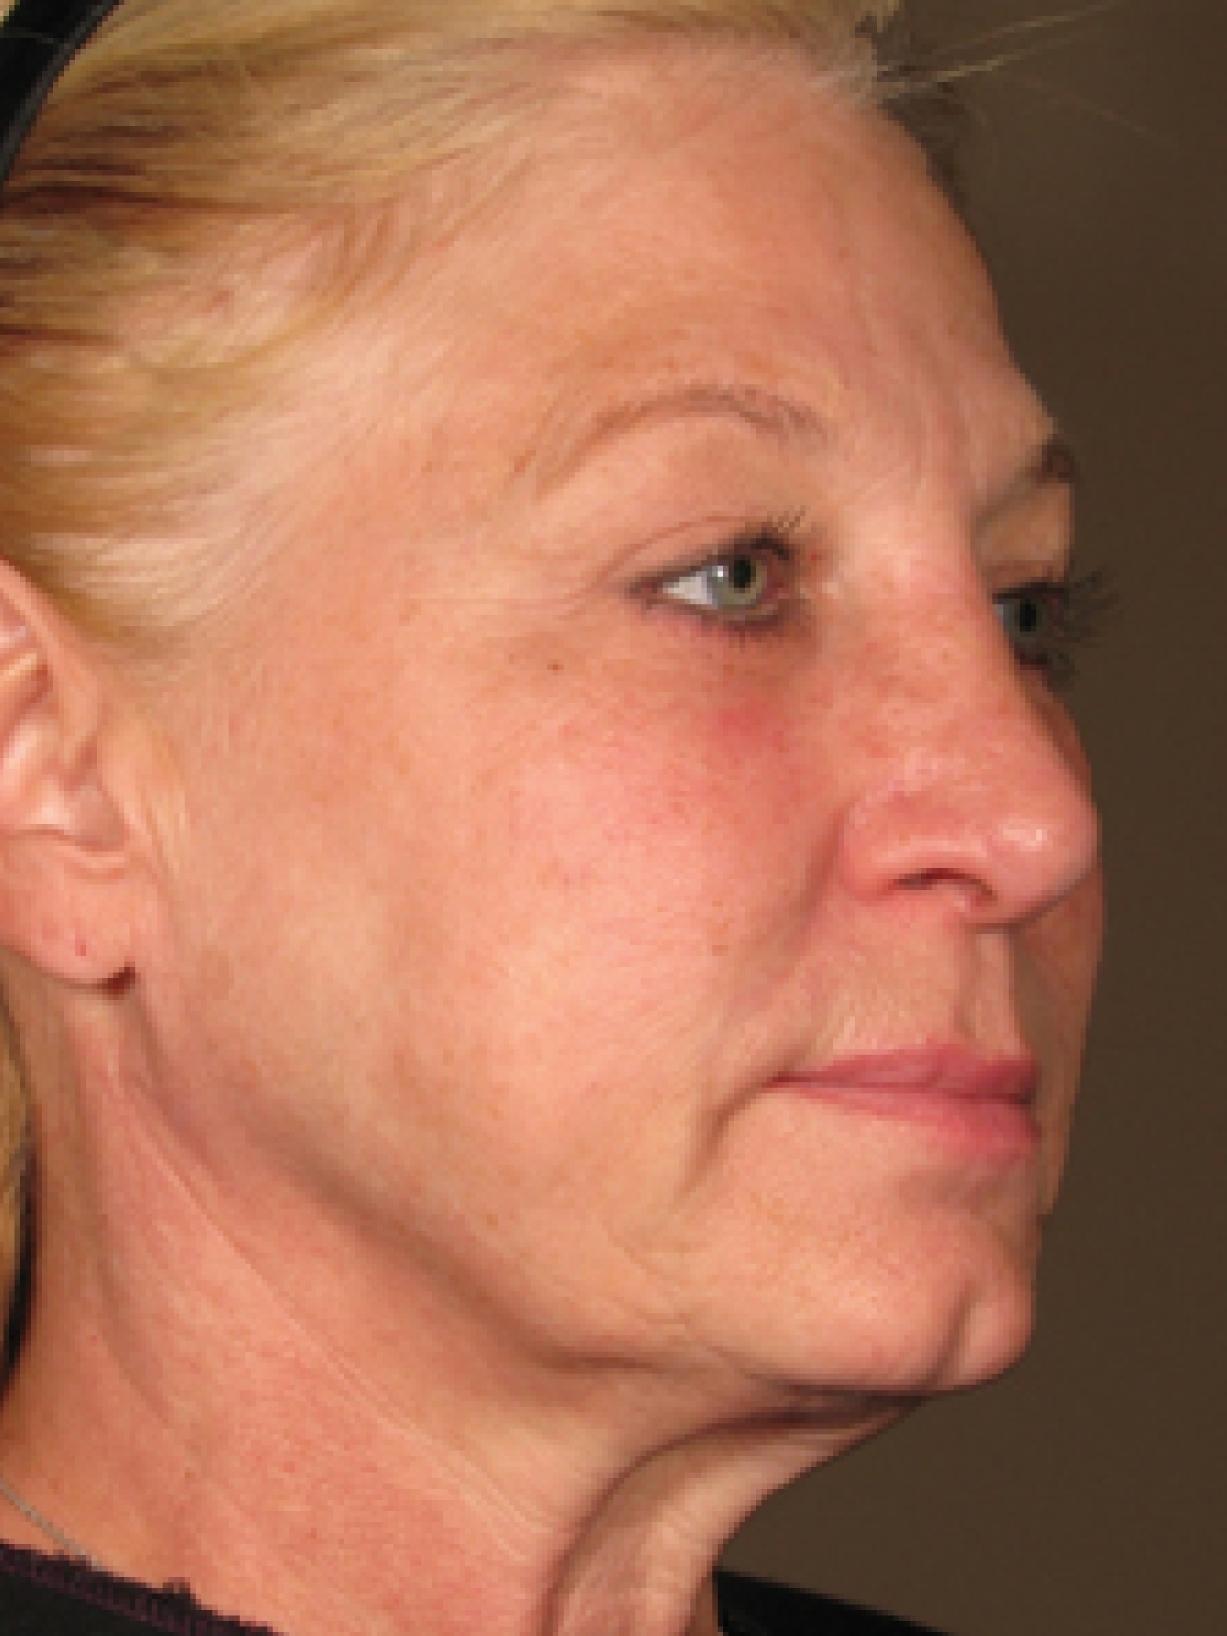 Ultherapy® - Face: Patient 4 - After  